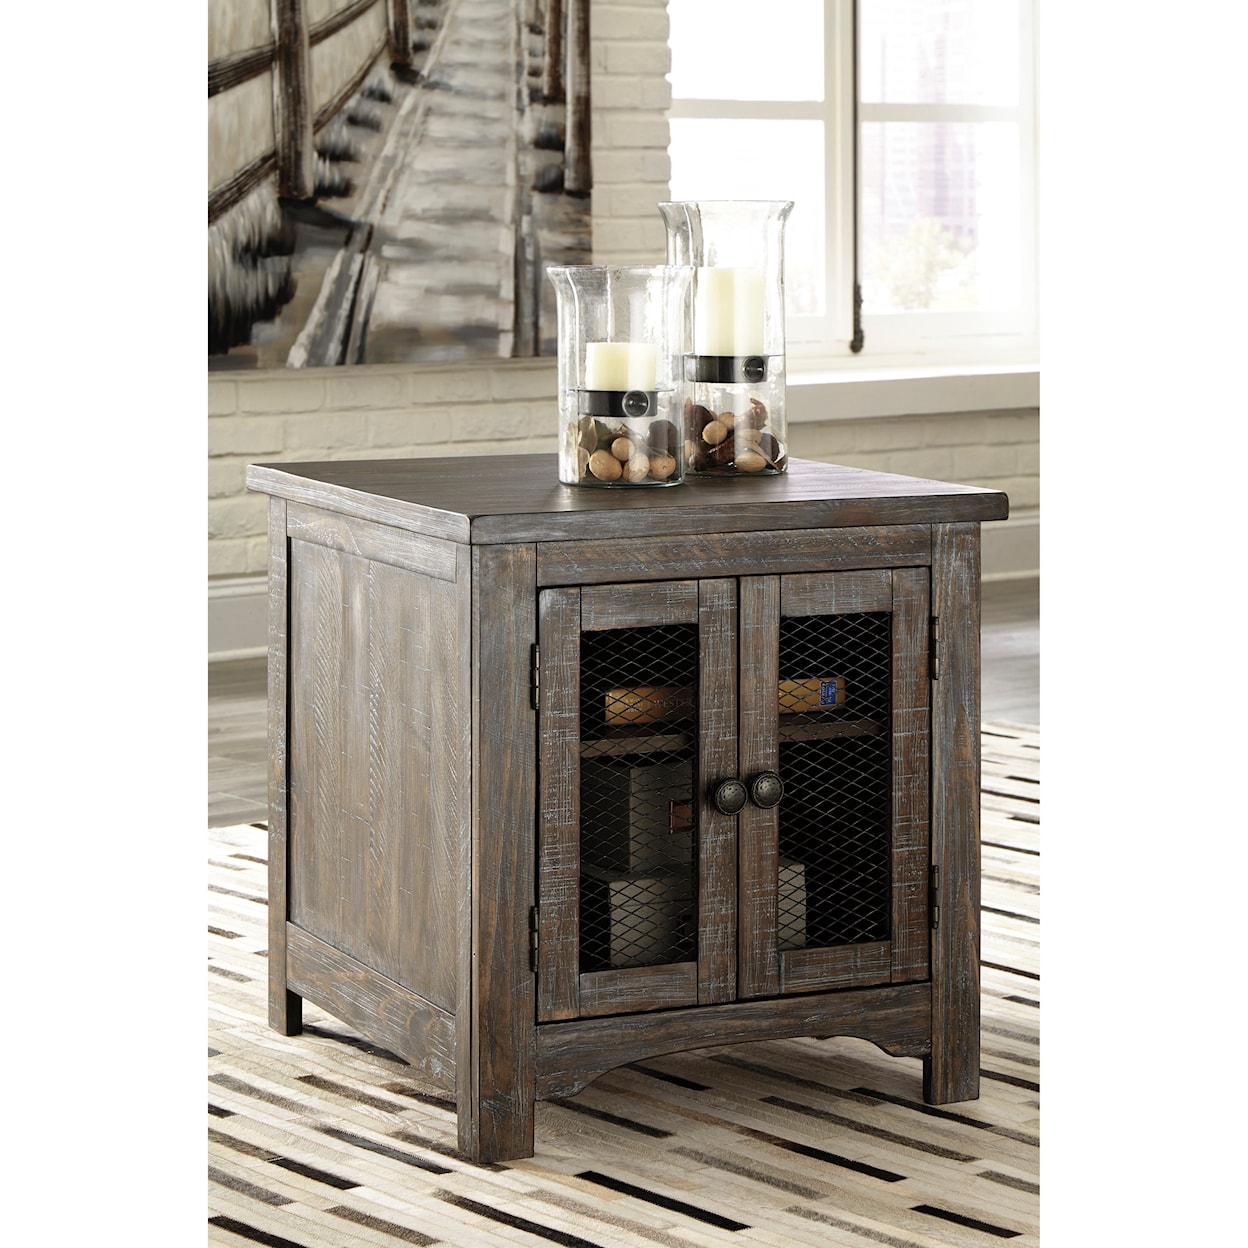 Signature Design by Ashley Danell Ridge End Table